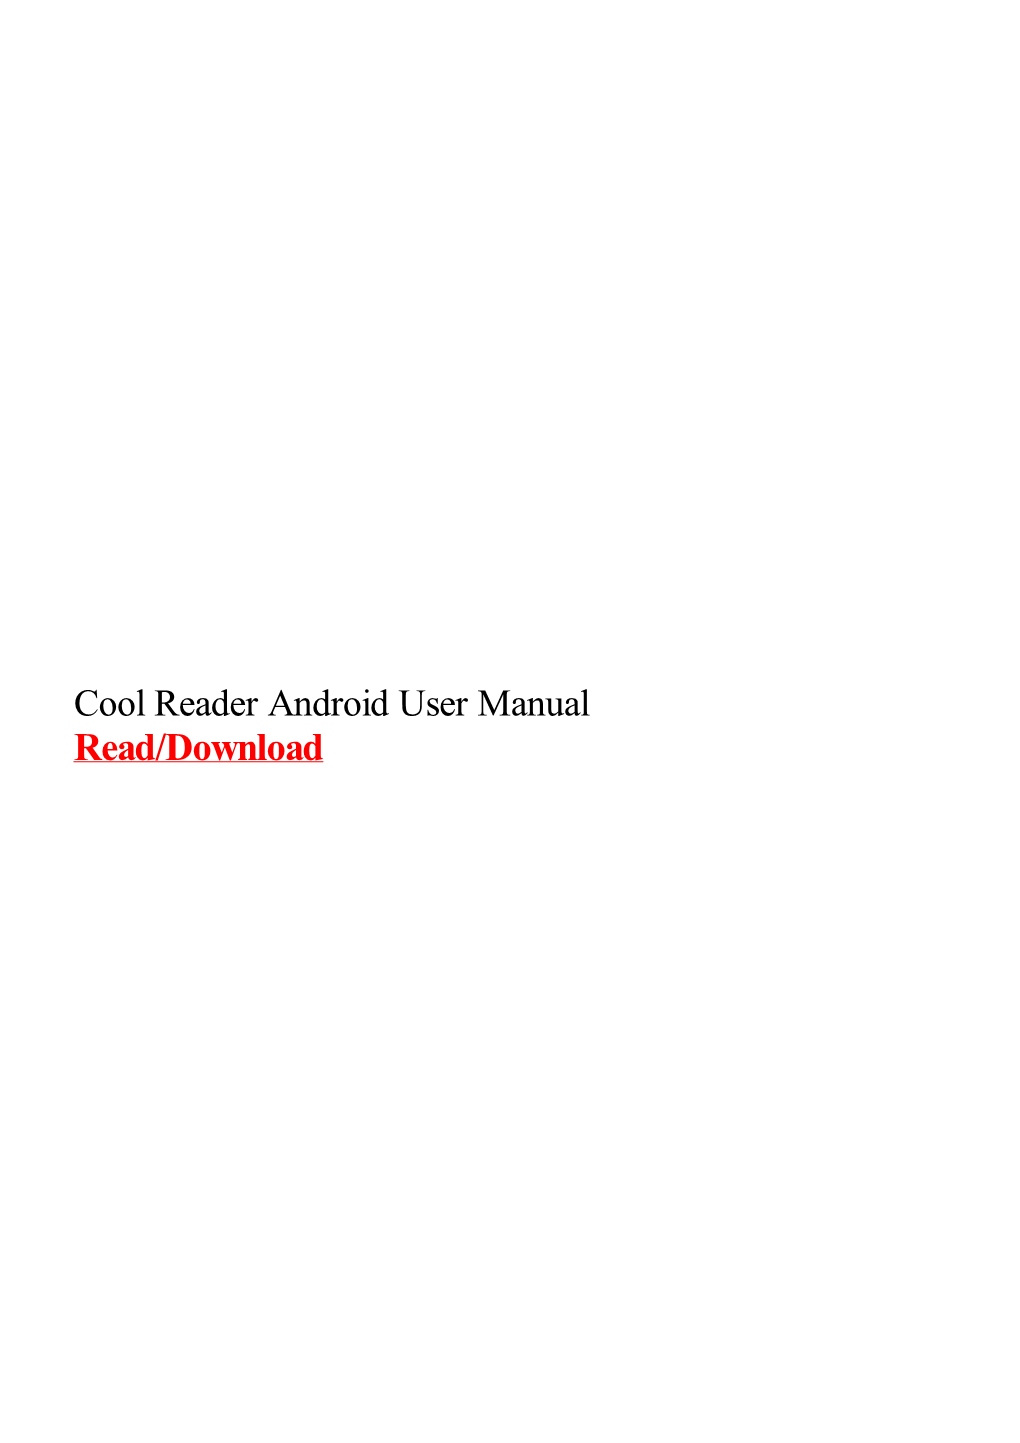 Cool Reader Android User Manual